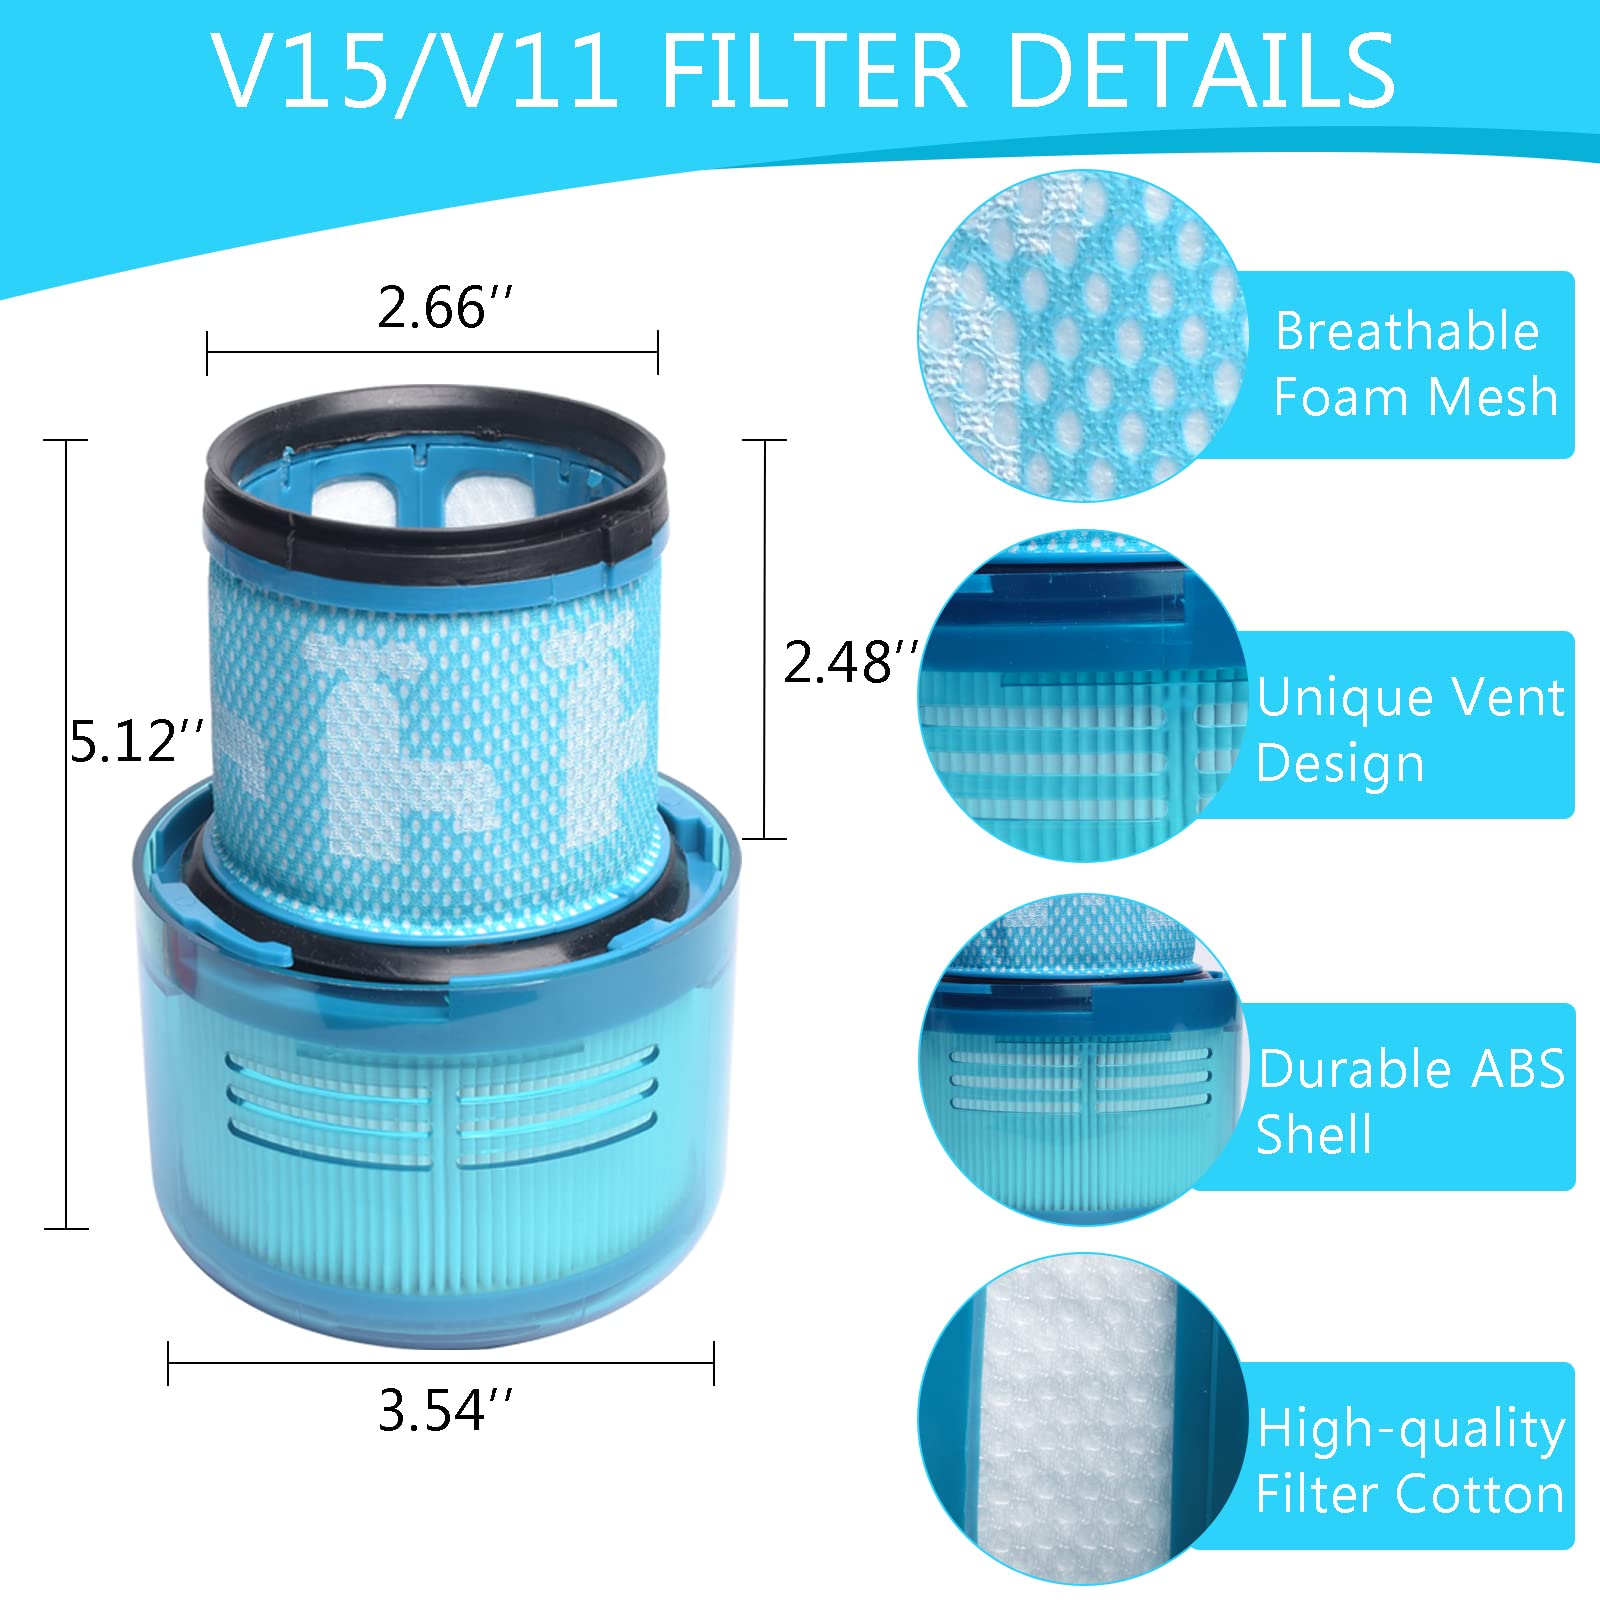 Walntec 3-Pack Blue Replacement Filters for Dyson V15 Detect, V15 Detect+, V11 Torque Drive, V11 Animal, and SV14 Cordless Stick Vacuum Cleaner